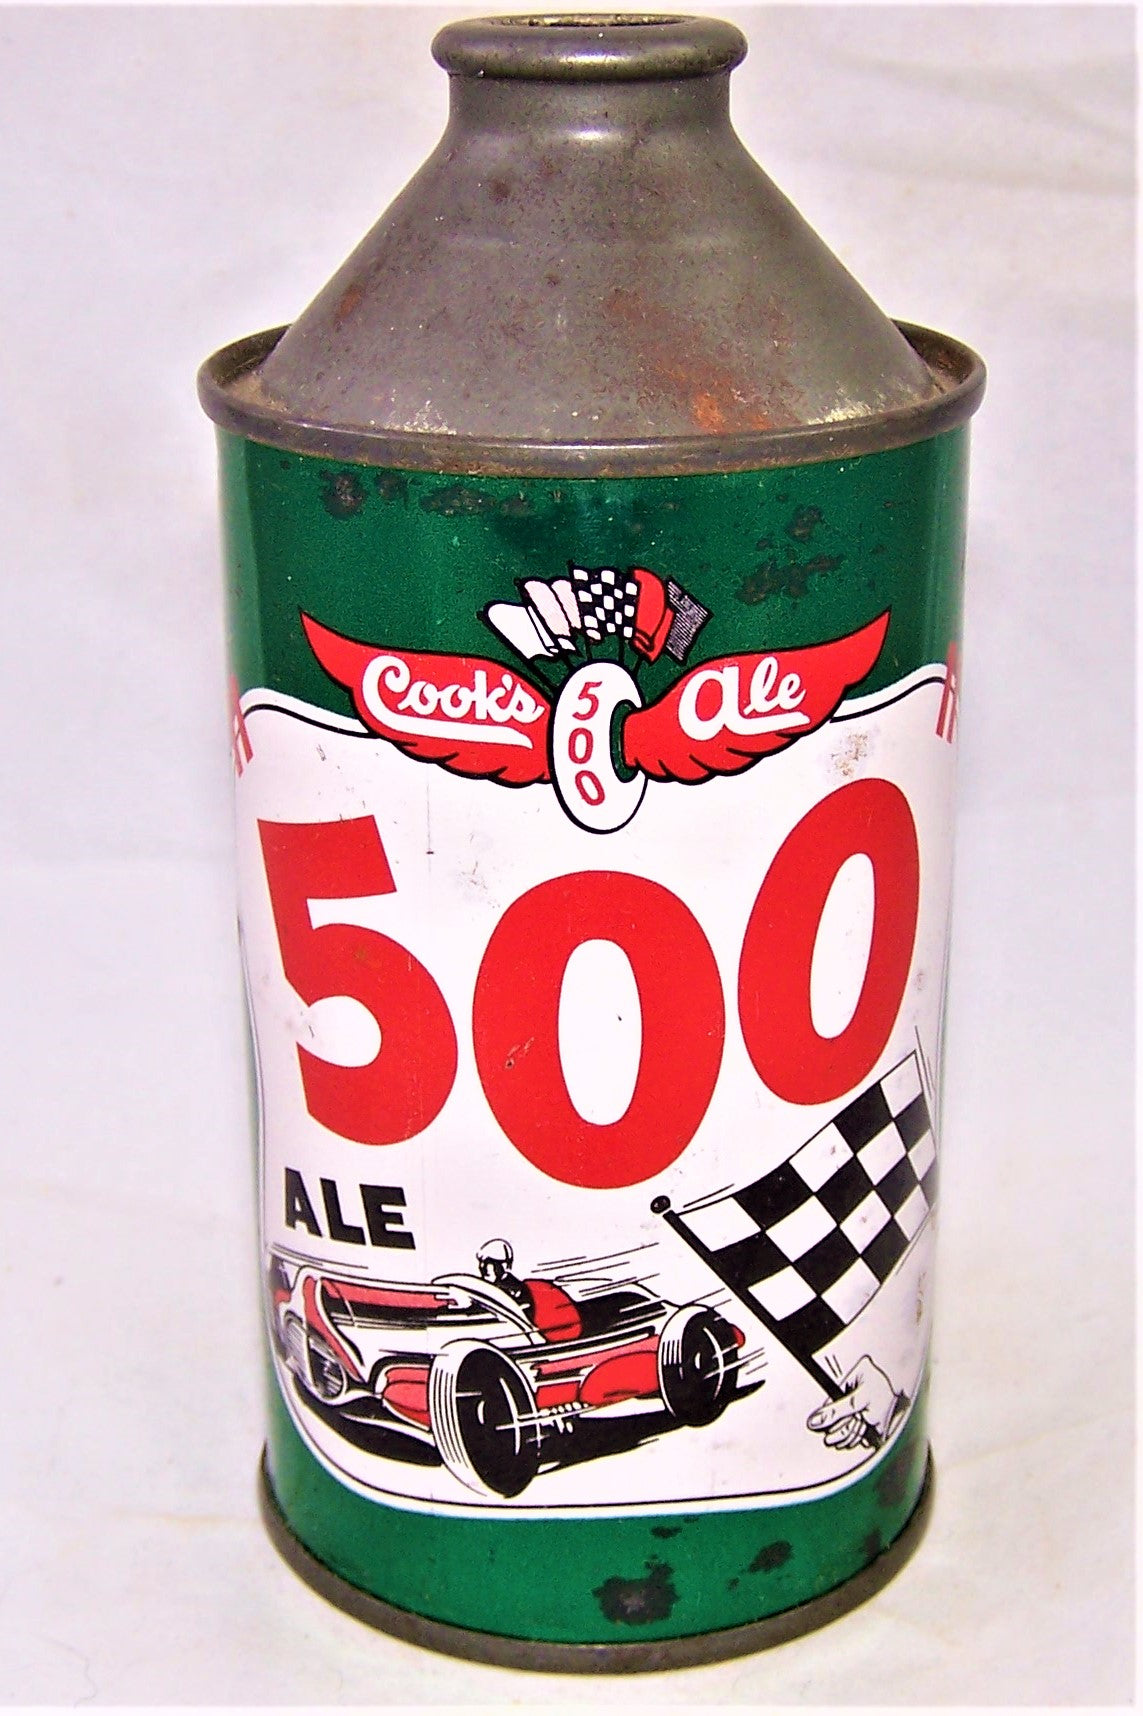 Cooks 500 Ale, USBC 158-03, Grade 1/1- Sold on 03/23/19